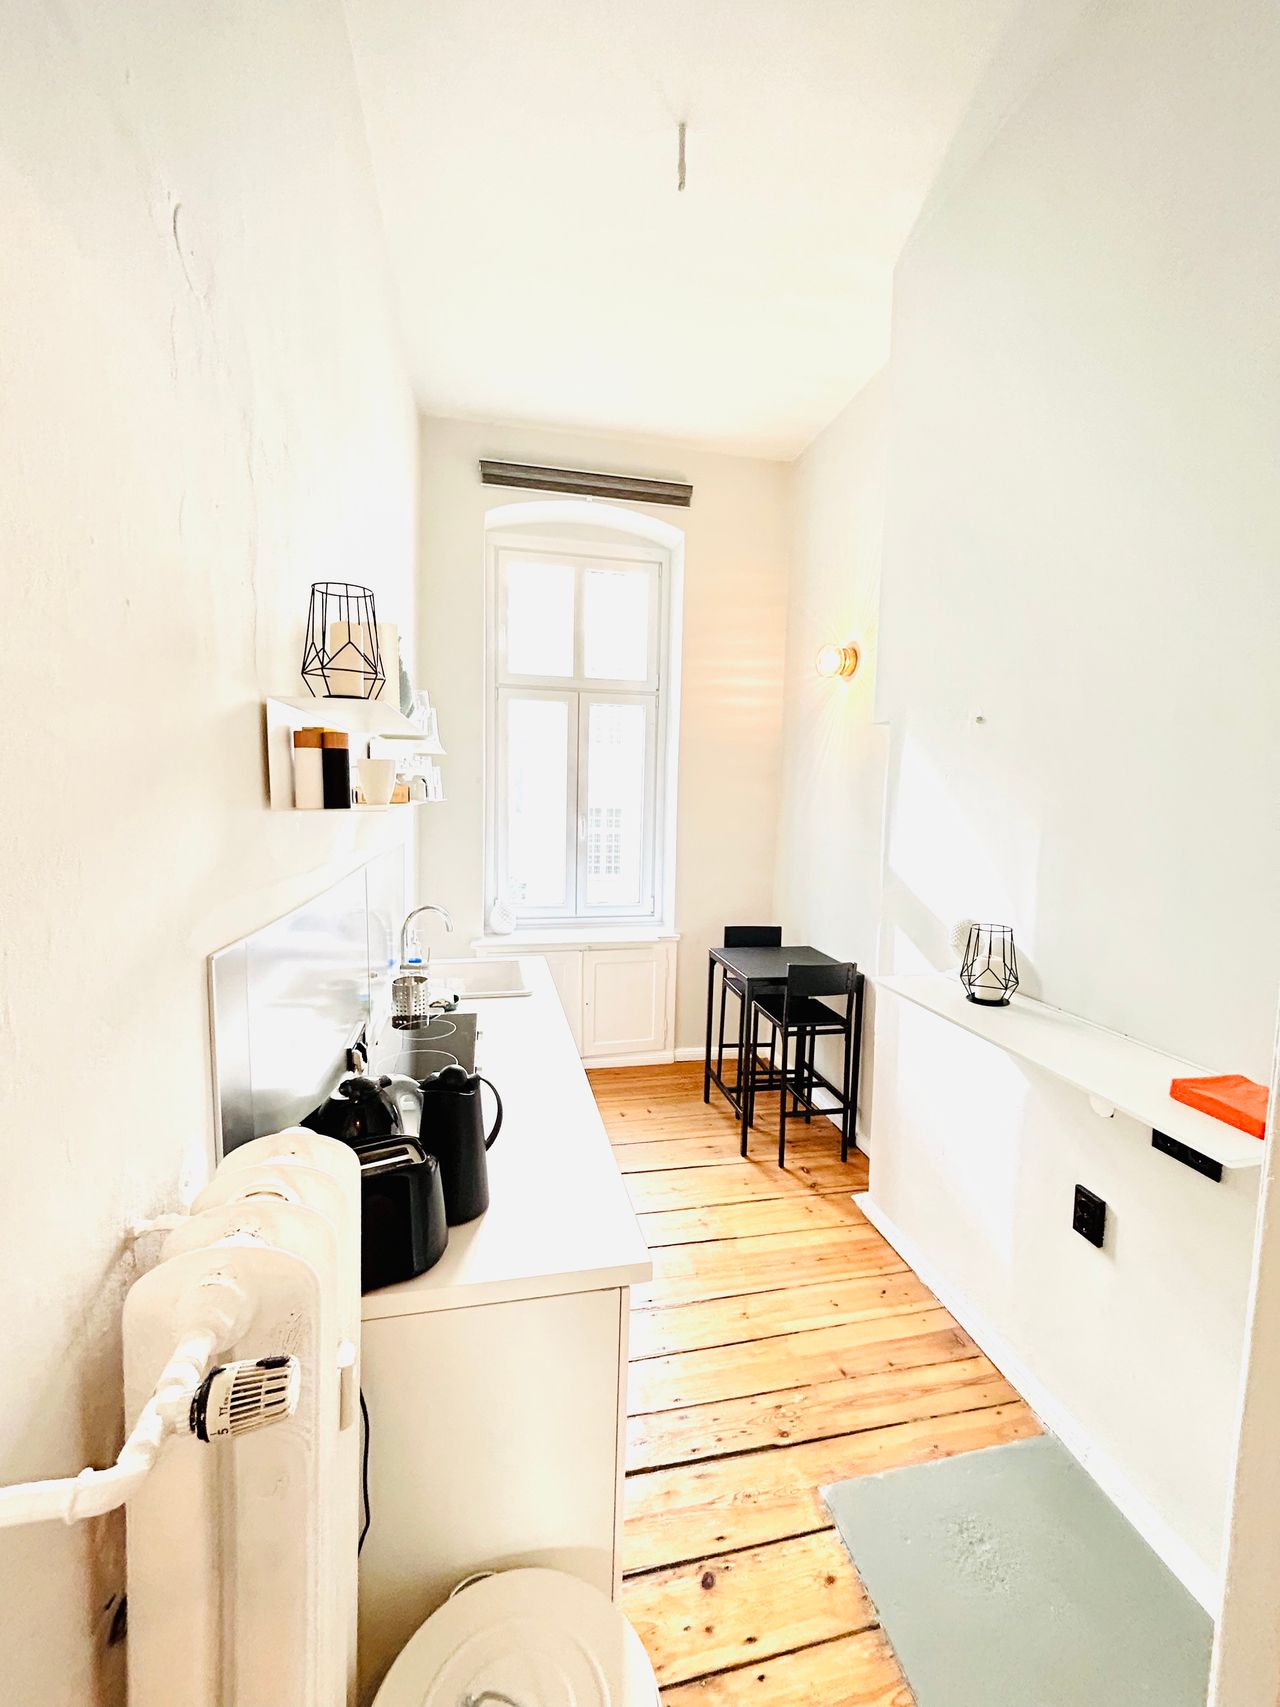 "Altbau"-Apartment in the historic Bavarian Quarter - beautiful, stylishly furnished, freshly renovated, bright, quiet, not far from KADEWE